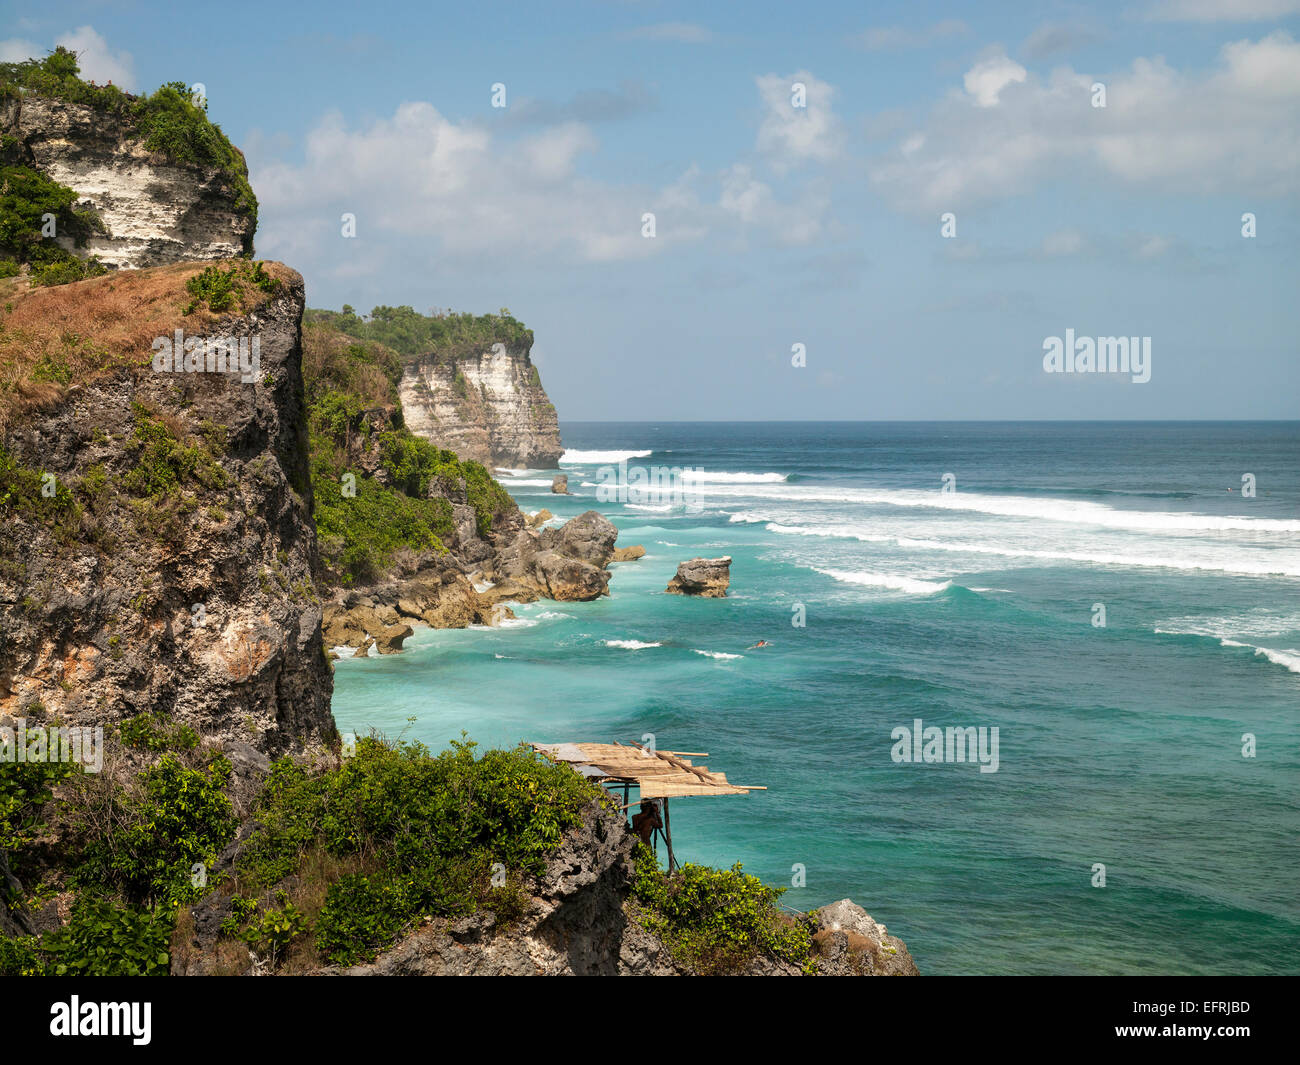 Blue Point Beach in Bali, Indonesia Stock Photo